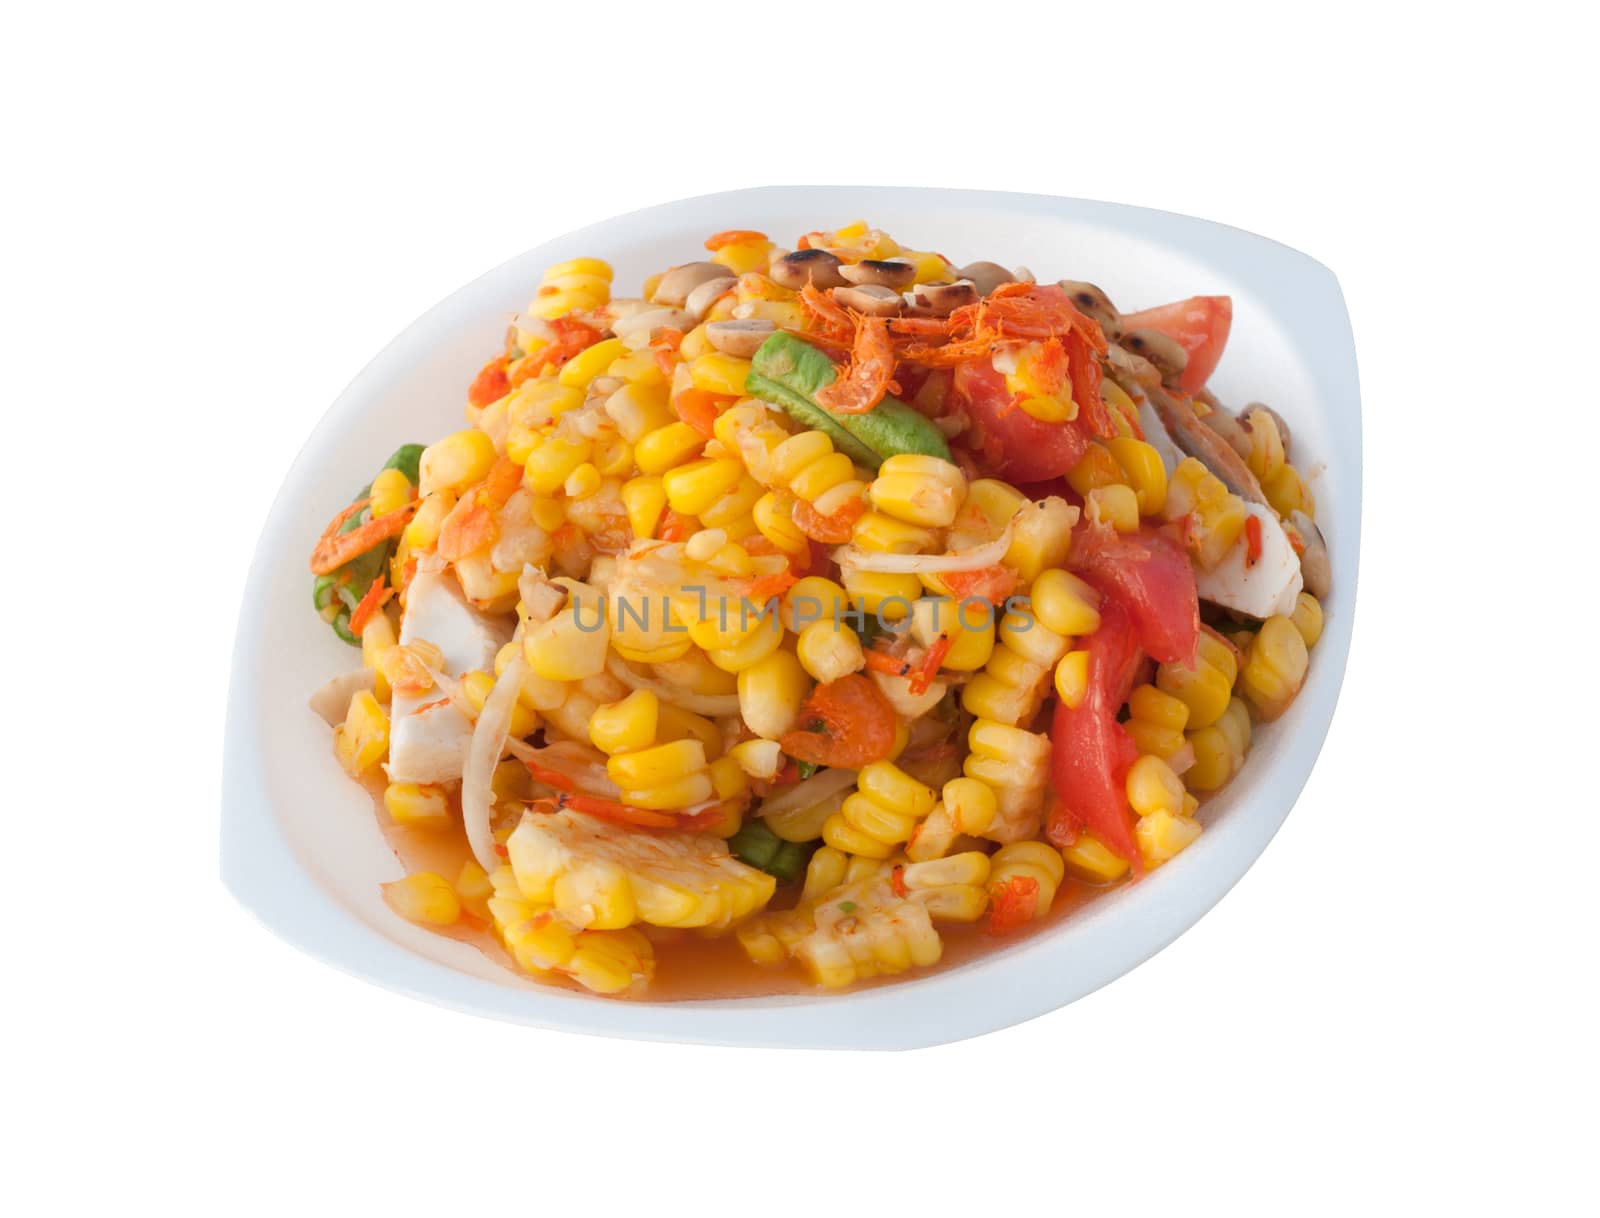 Corn salad with salted egg spicy-sour dressing by rainyrf